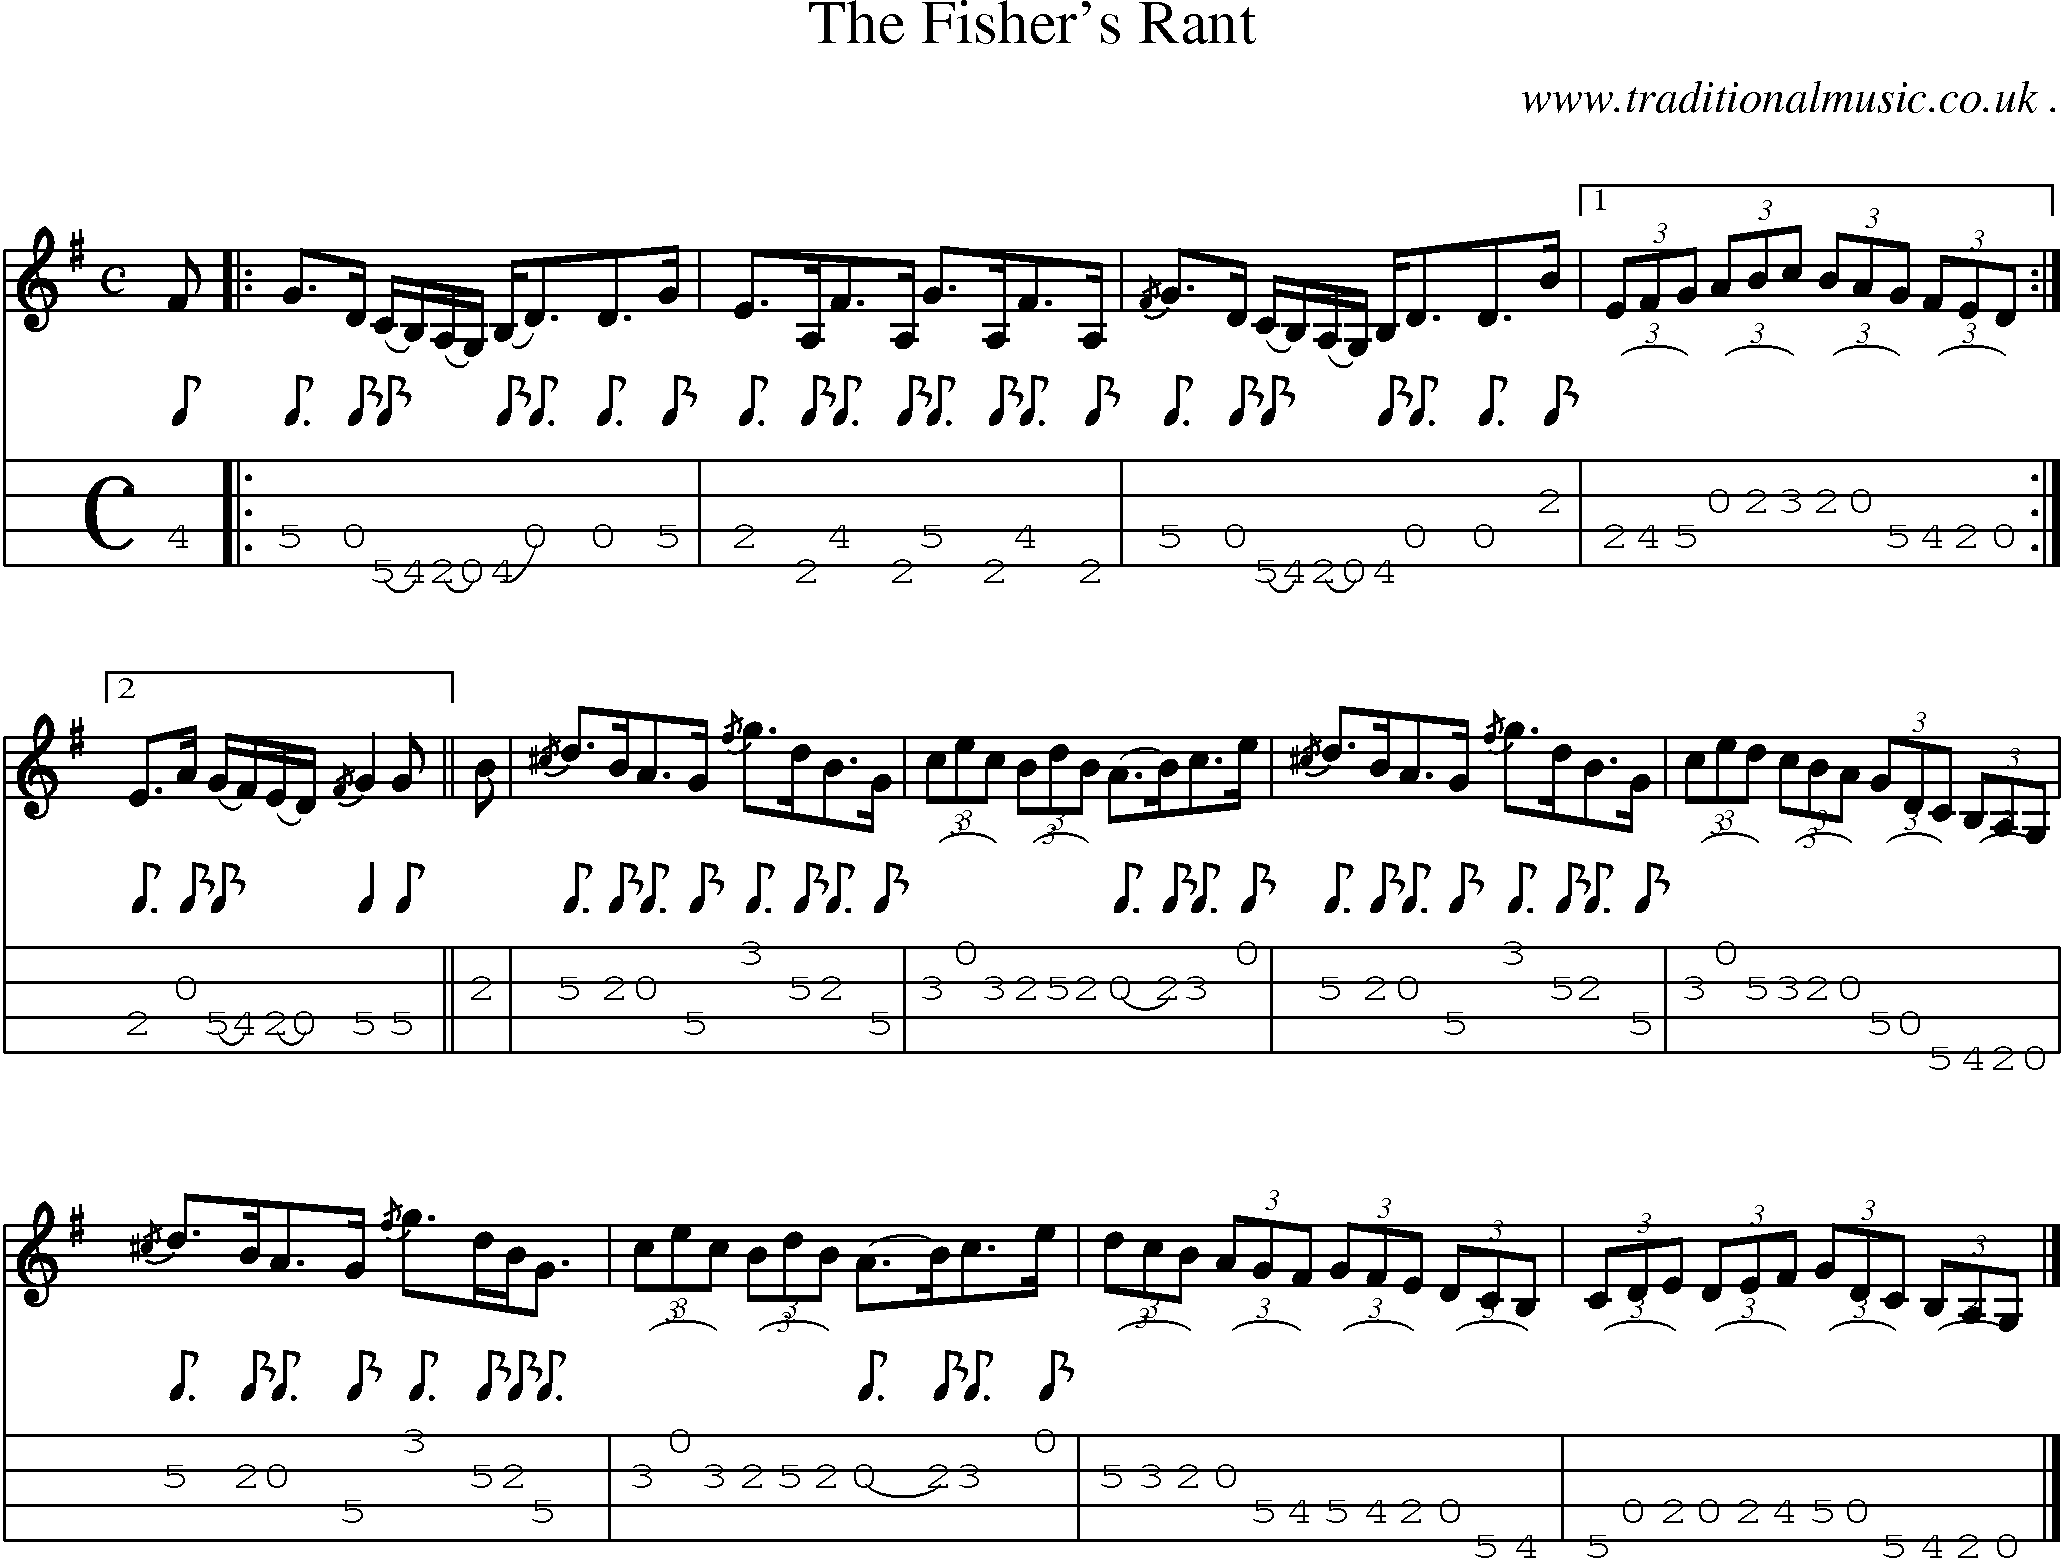 Sheet-music  score, Chords and Mandolin Tabs for The Fishers Rant